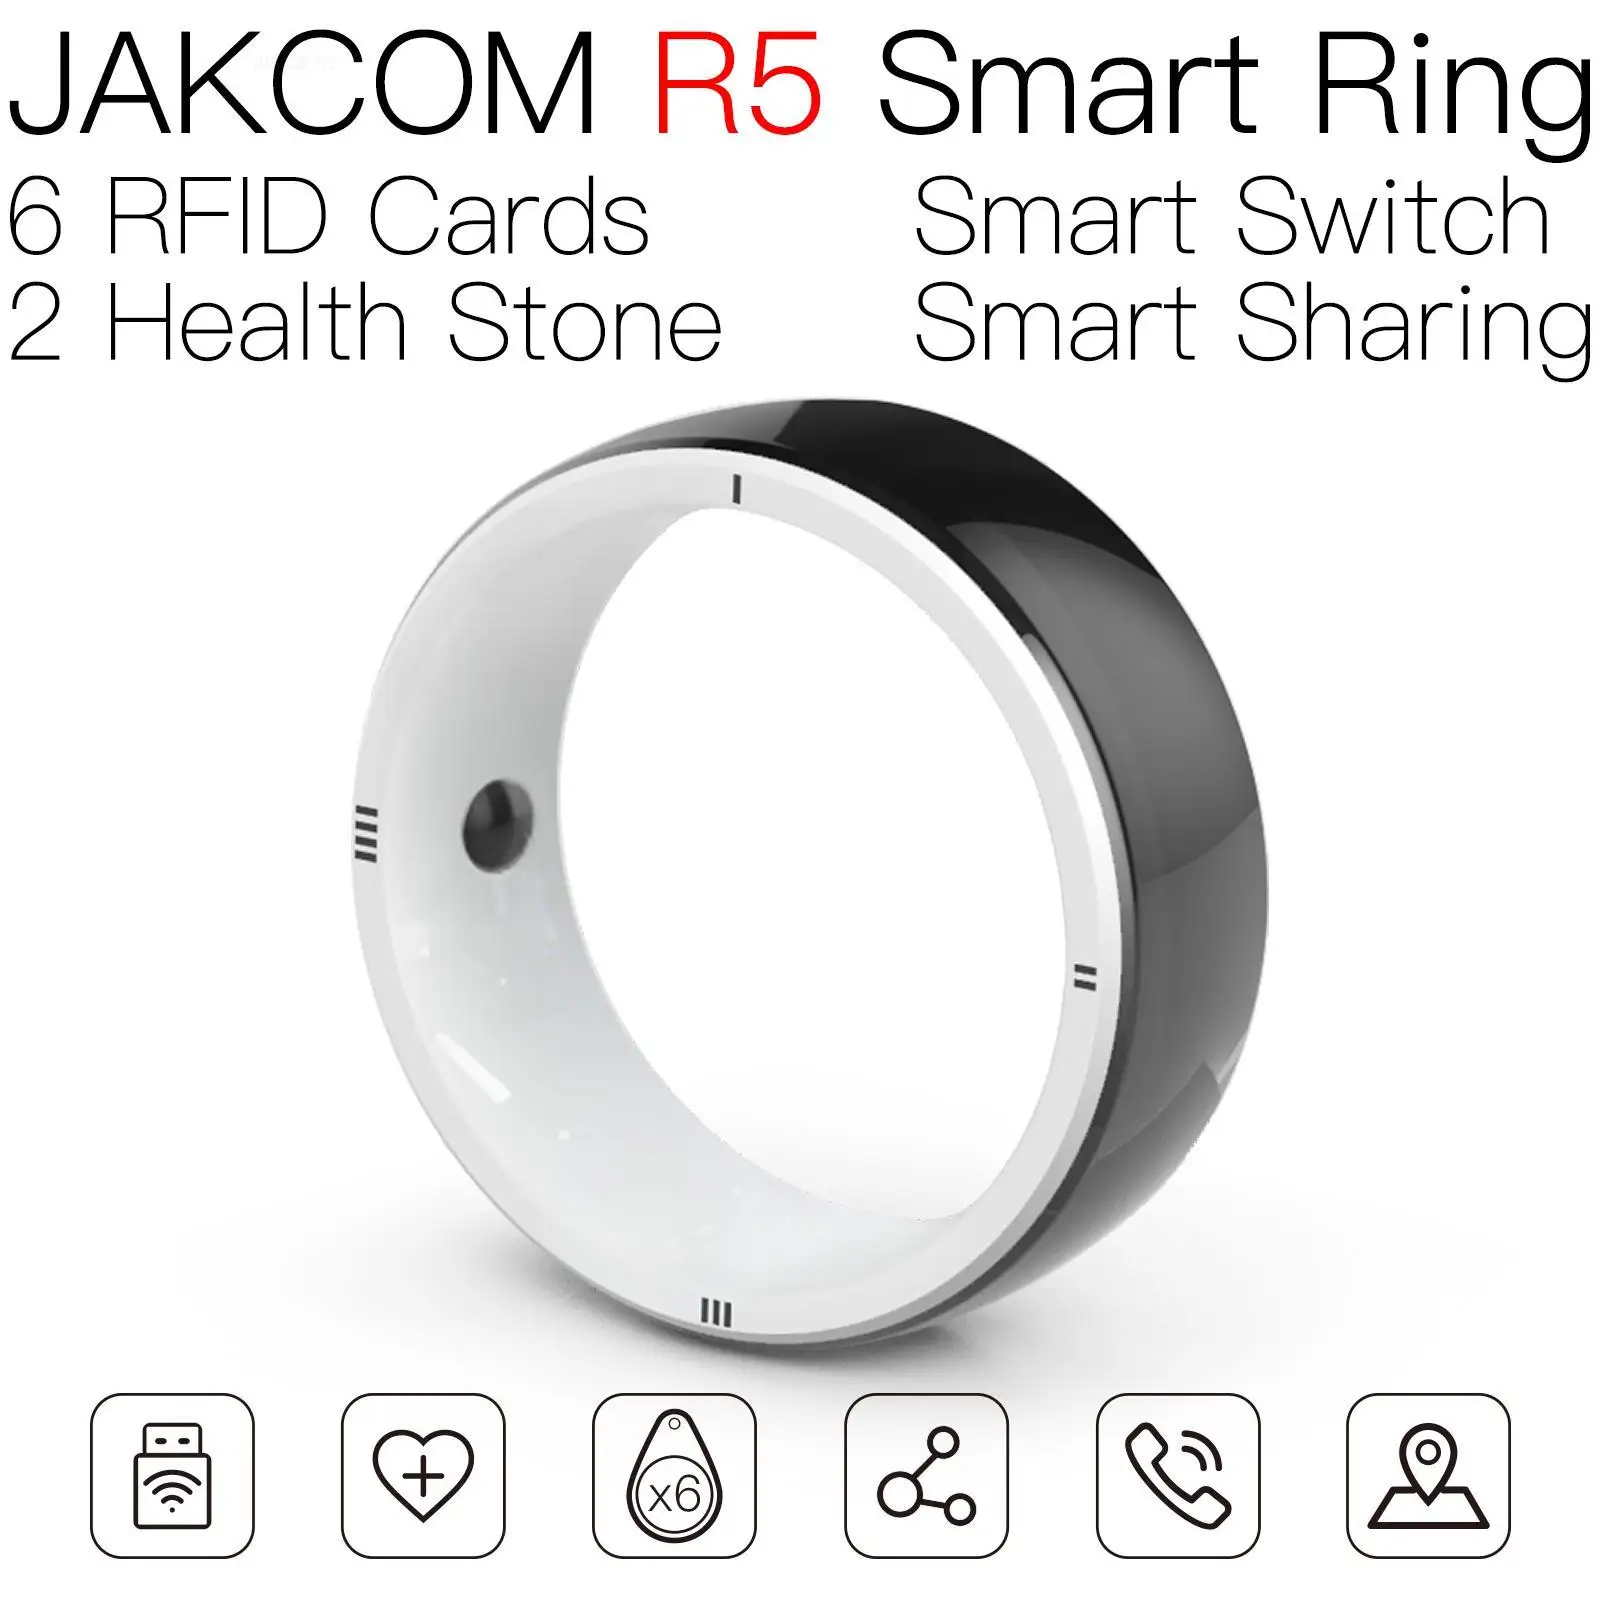 

JAKCOM R5 Smart Ring better than manilla uhf outdoor nfc sticker cattle ear tags for cows mini smd klemme tag magic rfid chip